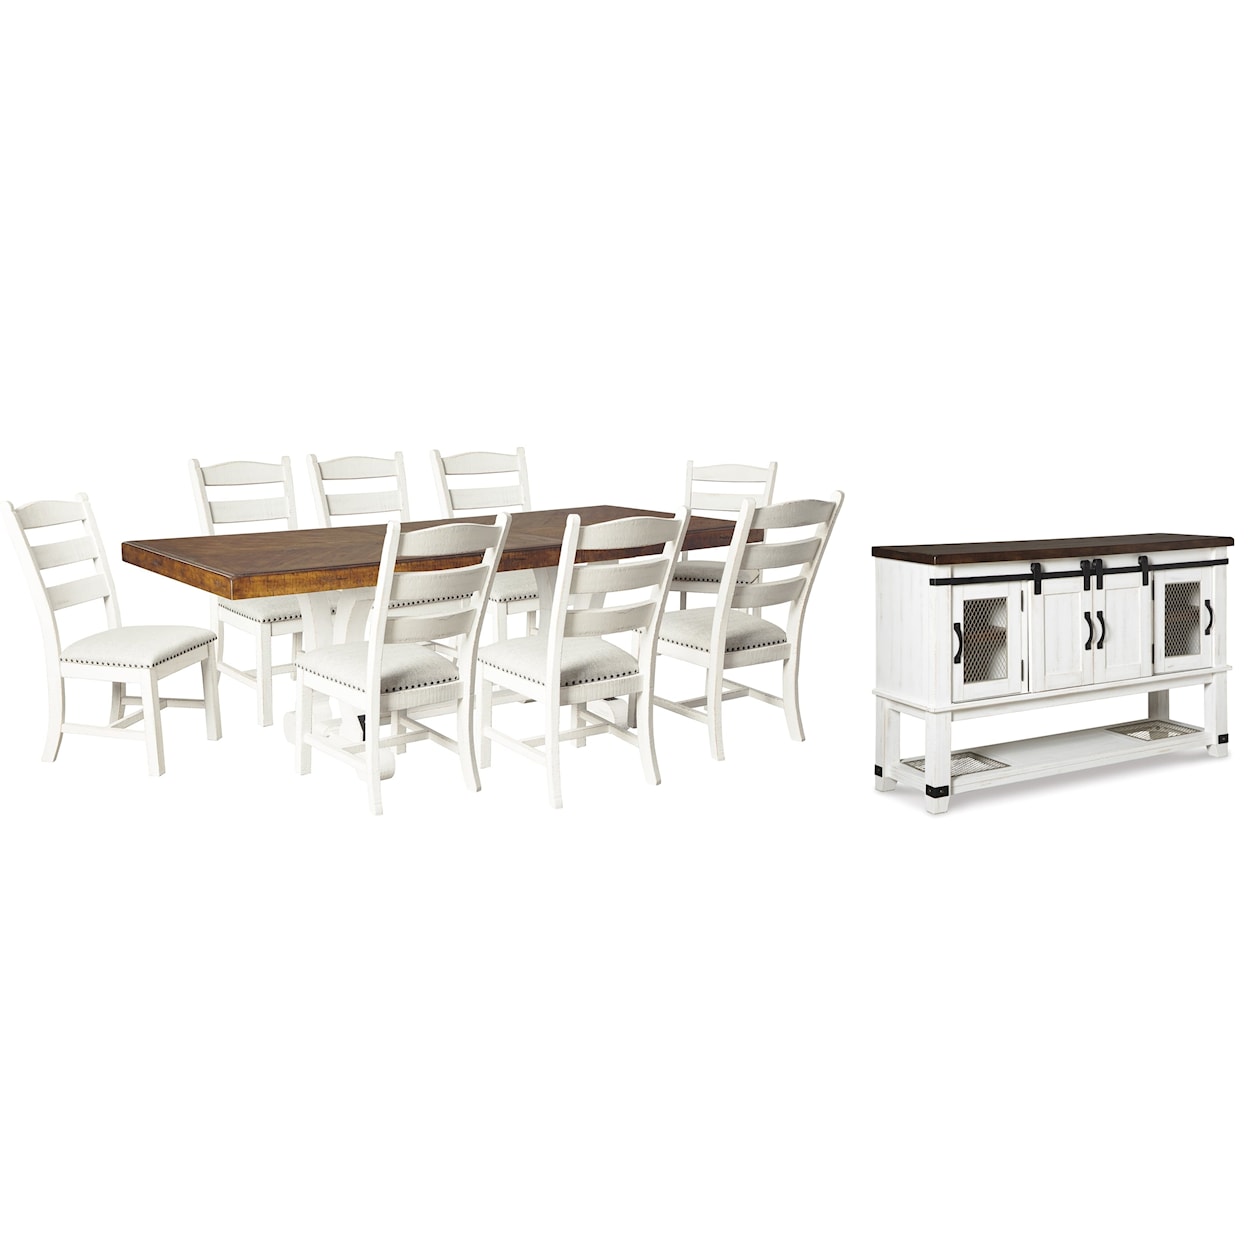 Ashley Furniture Signature Design Valebeck Dining Table and 8 Chairs with Server